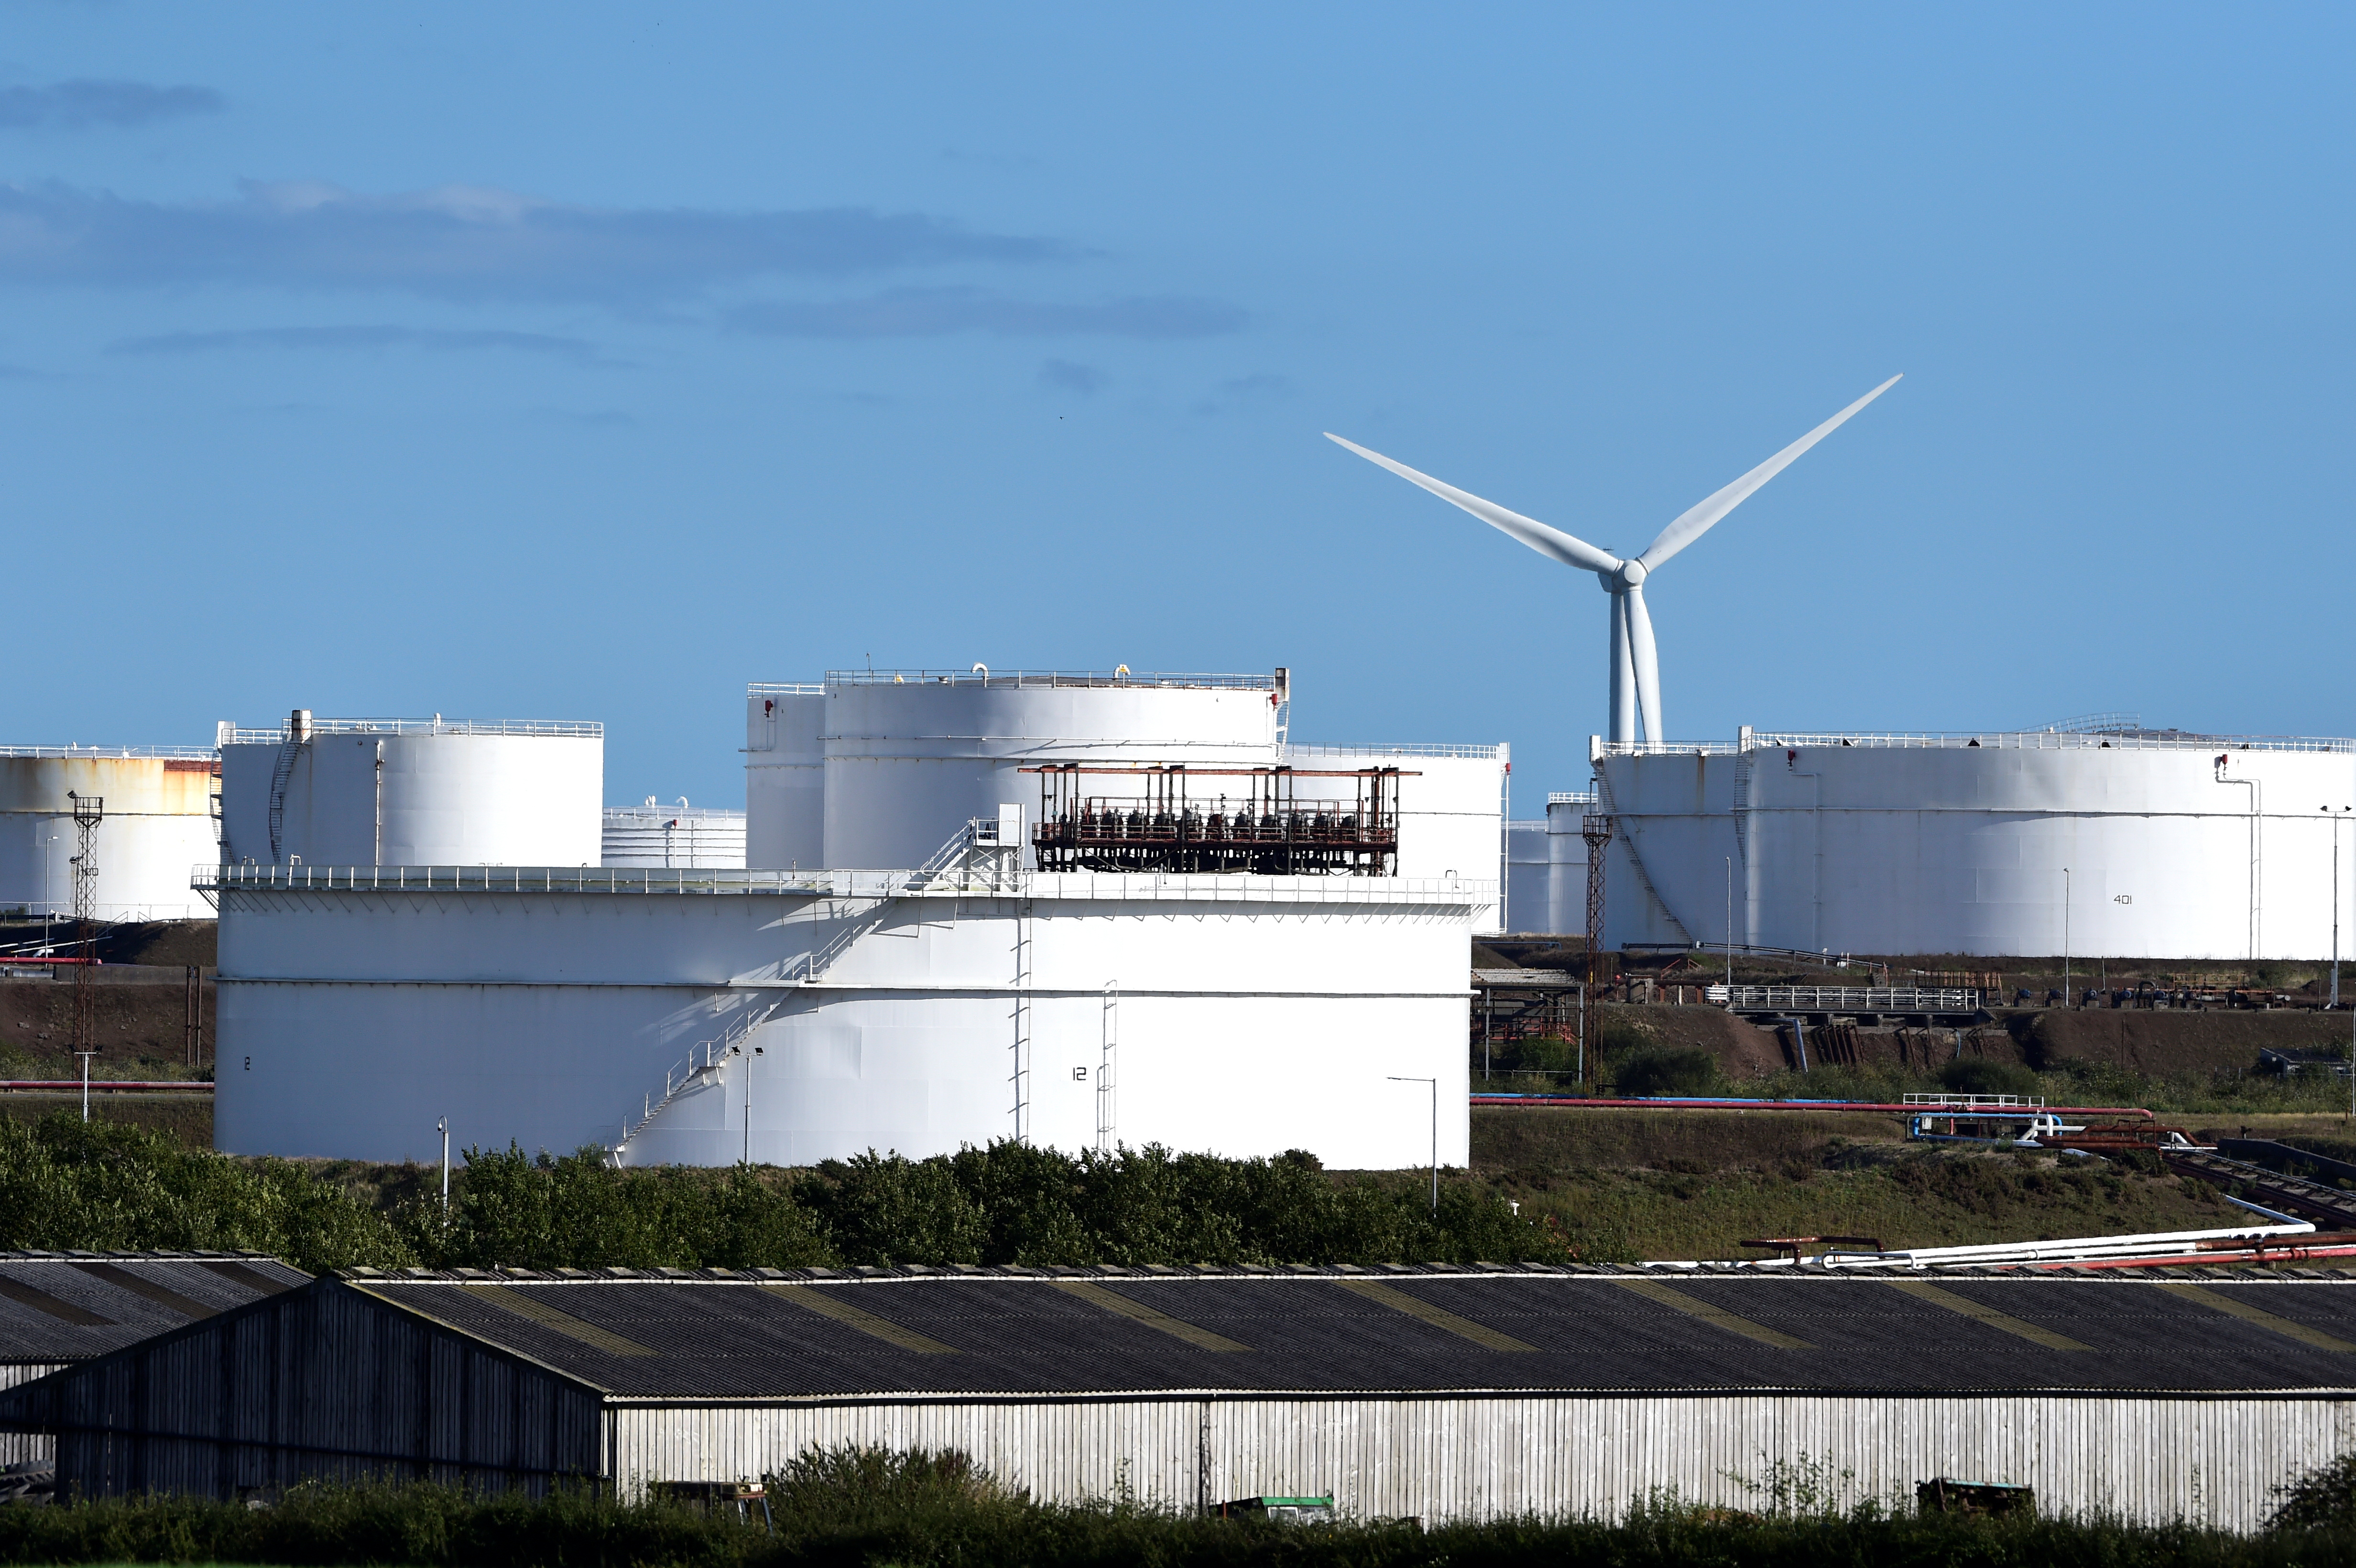 Storage tanks are seen at the Dragon Liquefied Natural Gas (LNG) facility at Waterston, Milford Haven, Pembrokeshire, Wales, Britain, September 20, 2021. REUTERS/Rebecca Naden